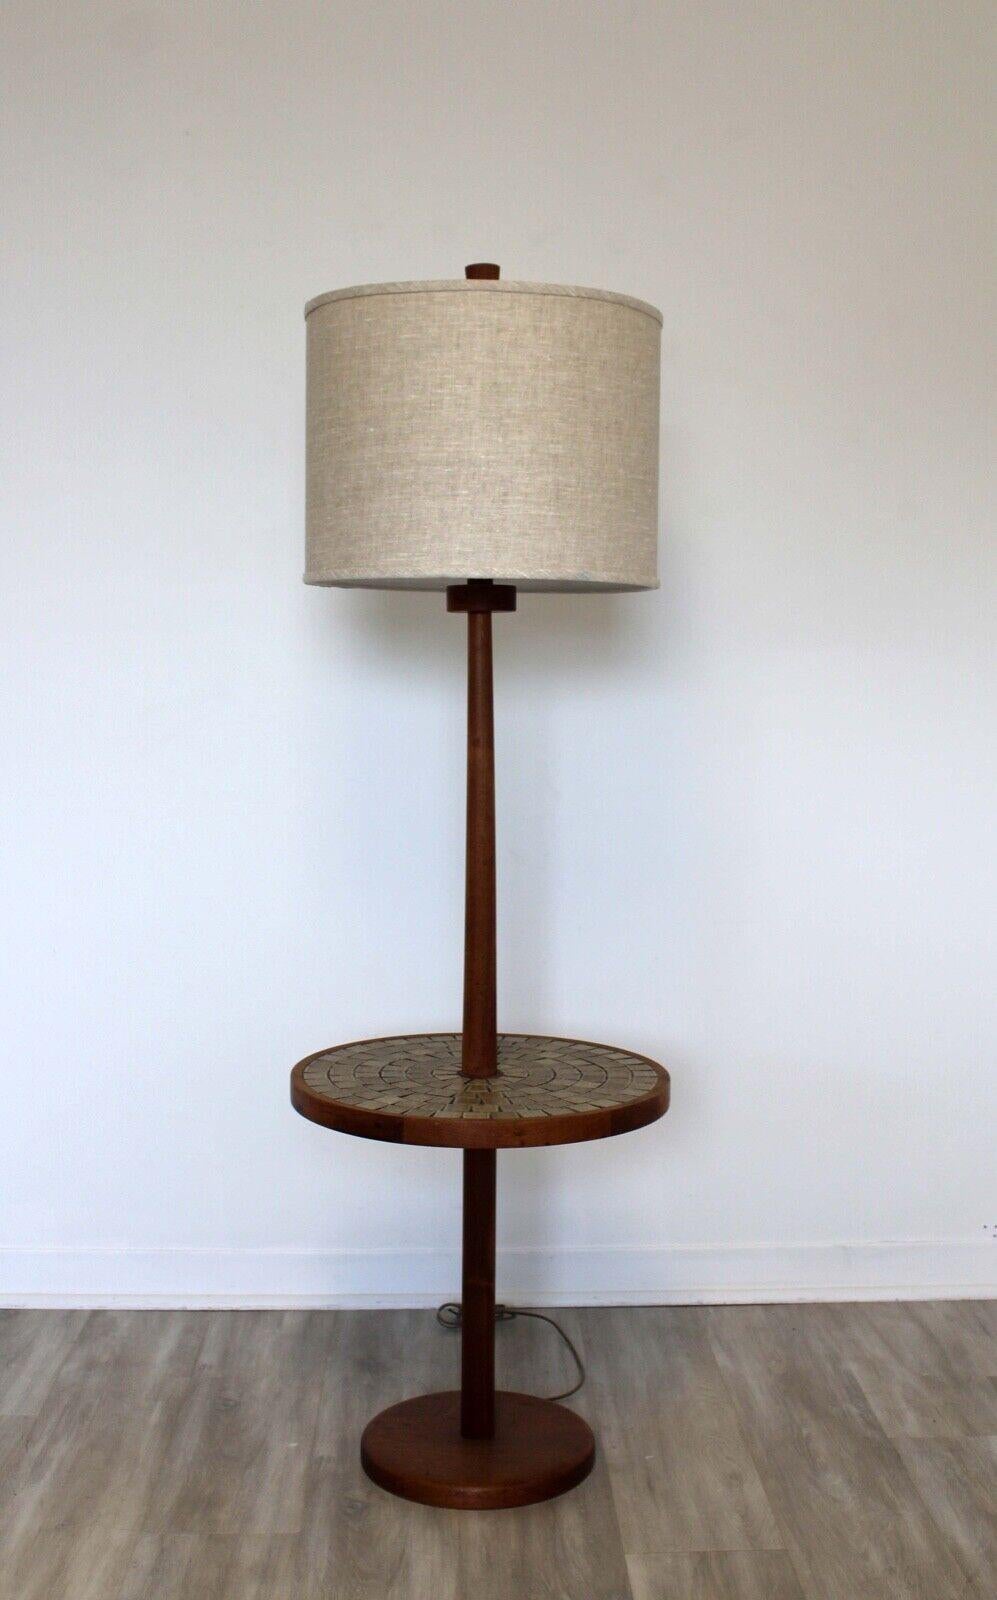 A spectacular Gordon and Jane Martz lamp w/ table up for consideration. The earthy toned tile inlaid into the walnut wood creates the perfect combination. Light turns on via twist knob. Perfect for a Mid-Century Modern house. Dimensions: 19